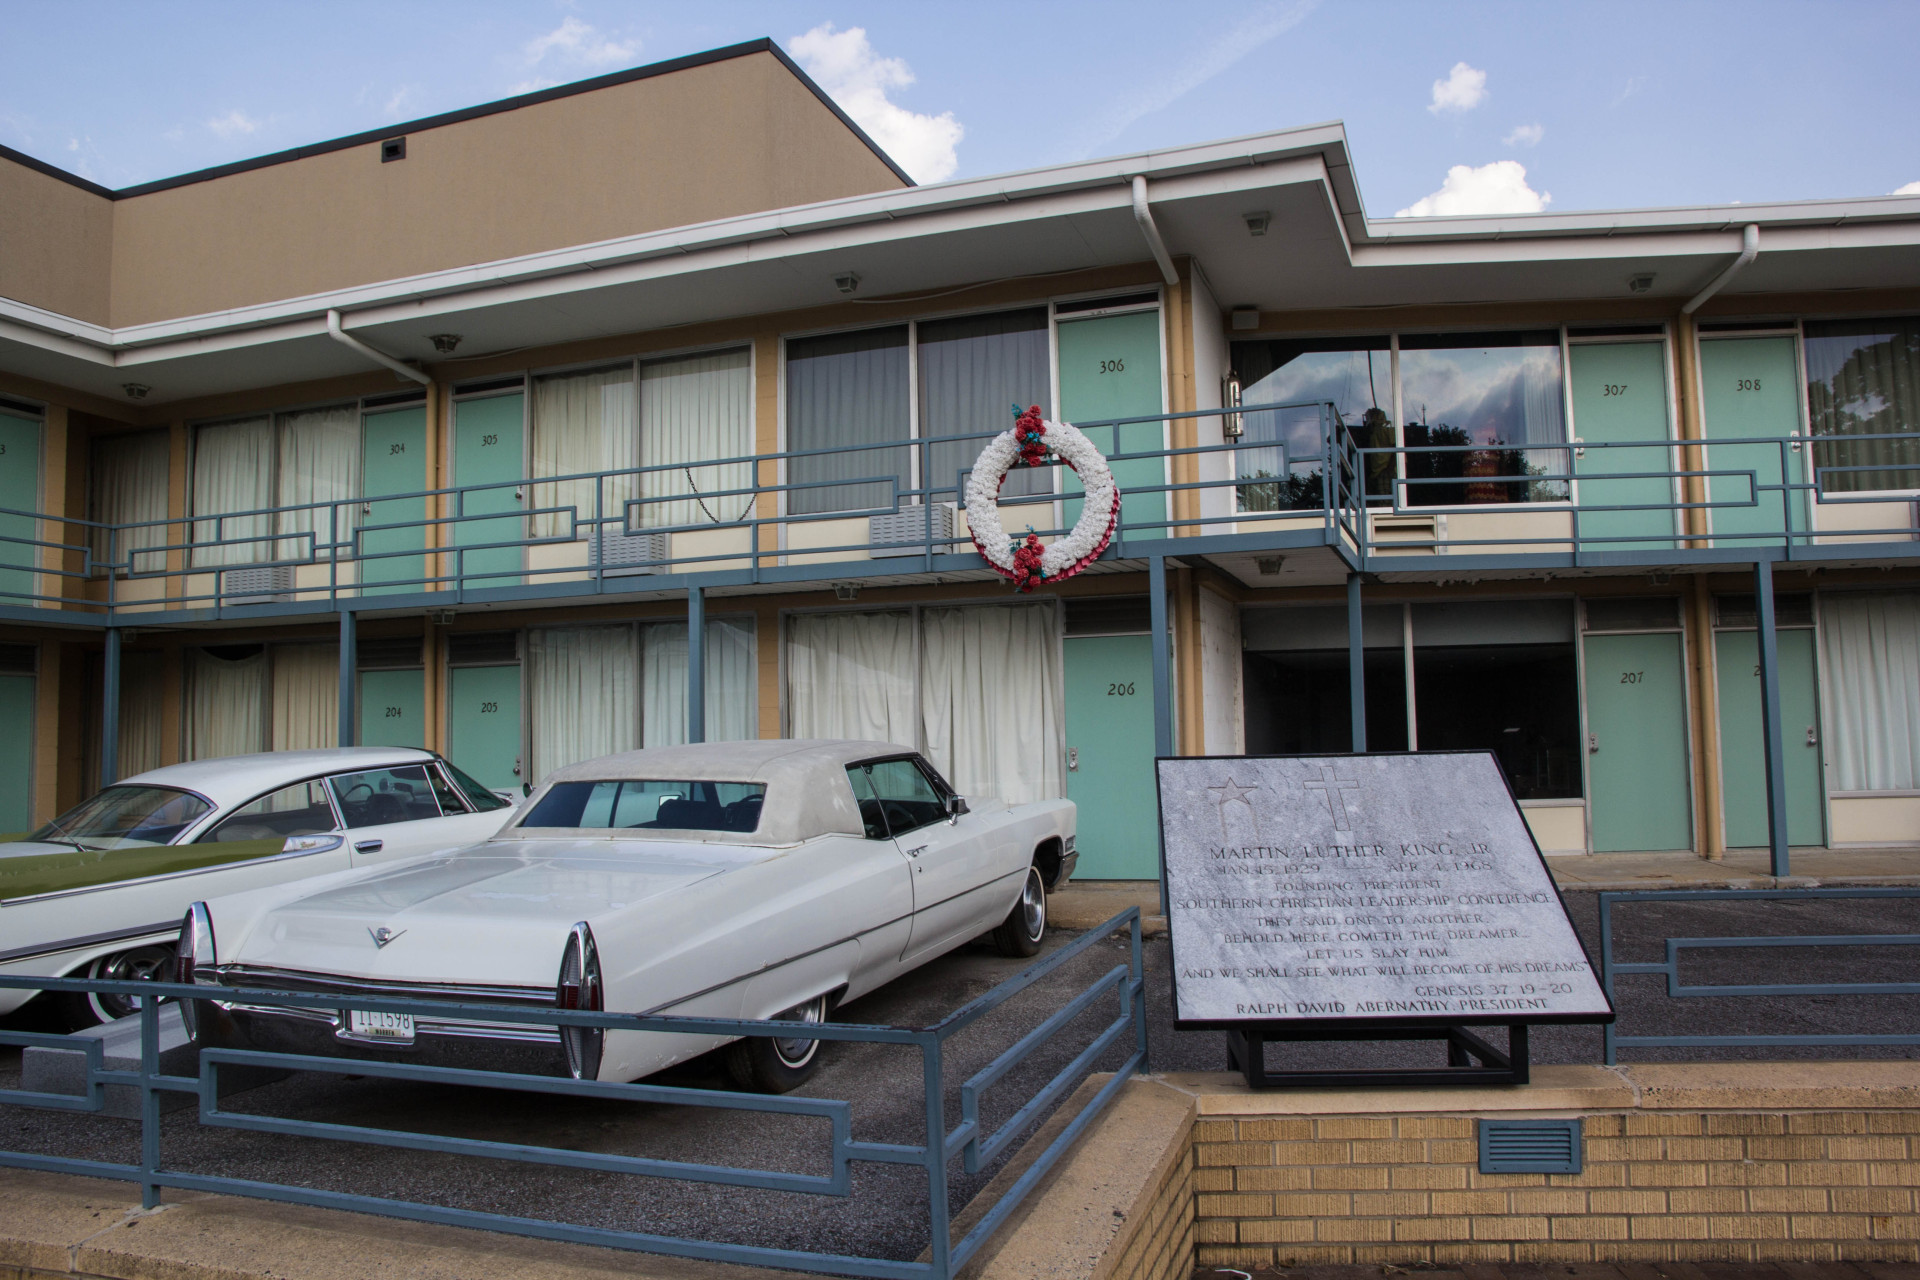 After falling into disrepair and closing, the hotel became the National Civil Rights Museum in 1991. It underwent considerable renovation in 2014.<p><a href="https://www.msn.com/en-us/community/channel/vid-7xx8mnucu55yw63we9va2gwr7uihbxwc68fxqp25x6tg4ftibpra?cvid=94631541bc0f4f89bfd59158d696ad7e">Follow us and access great exclusive content every day</a></p>